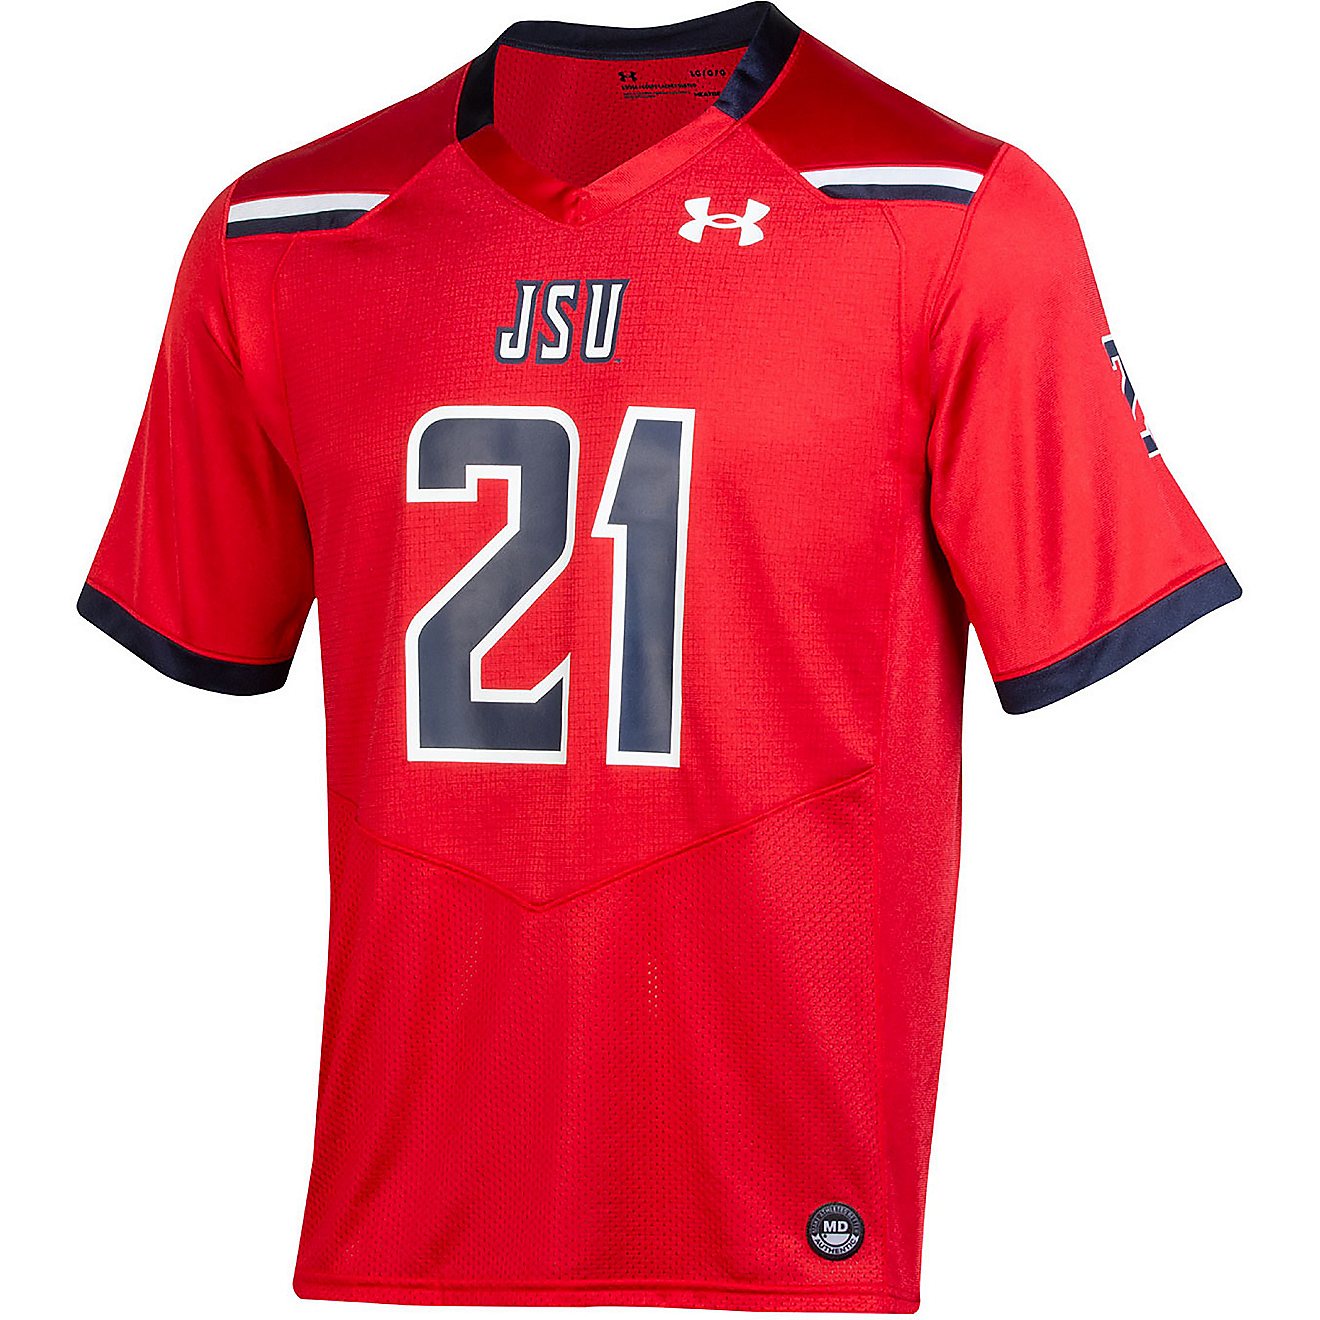 Under Armour Men's Jackson State University Replica Football Jersey                                                              - view number 2